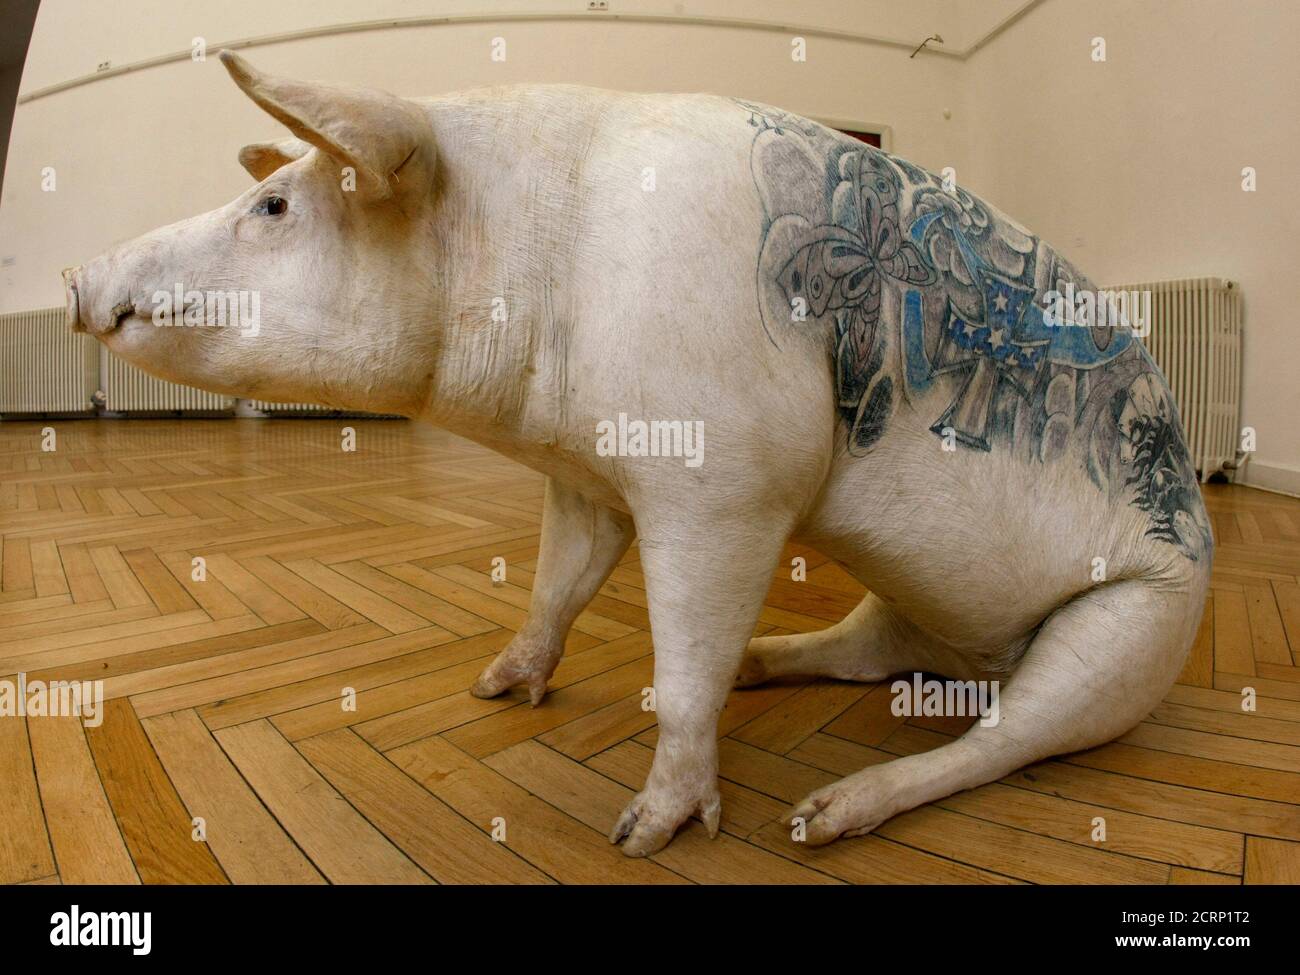 The artwork 'Linda' representing a stuffed pig, by Belgian artist Wim Delvoye at the 'Tierperspektiven' (animal perspective) exhibition is pictured inside the Georg-Kolbe Museum in Berlin May 8, 2009.    REUTERS/Fabrizio Bensch (GERMANY SOCIETY ENTERTAINMENT) Stock Photo